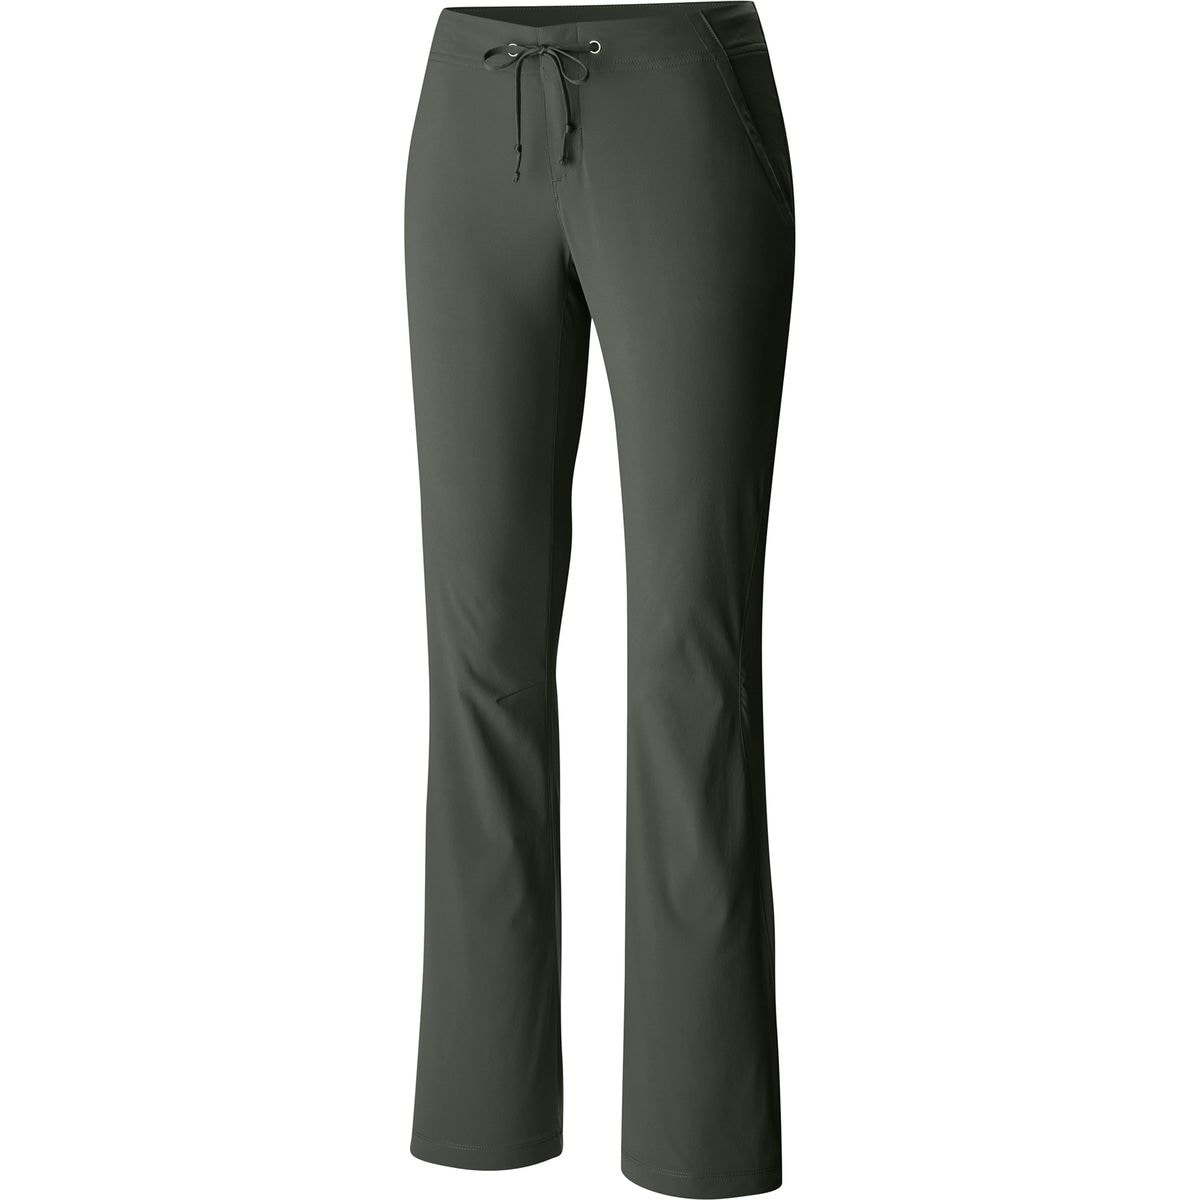 Anytime Outdoor Boot Cut Pant - Women